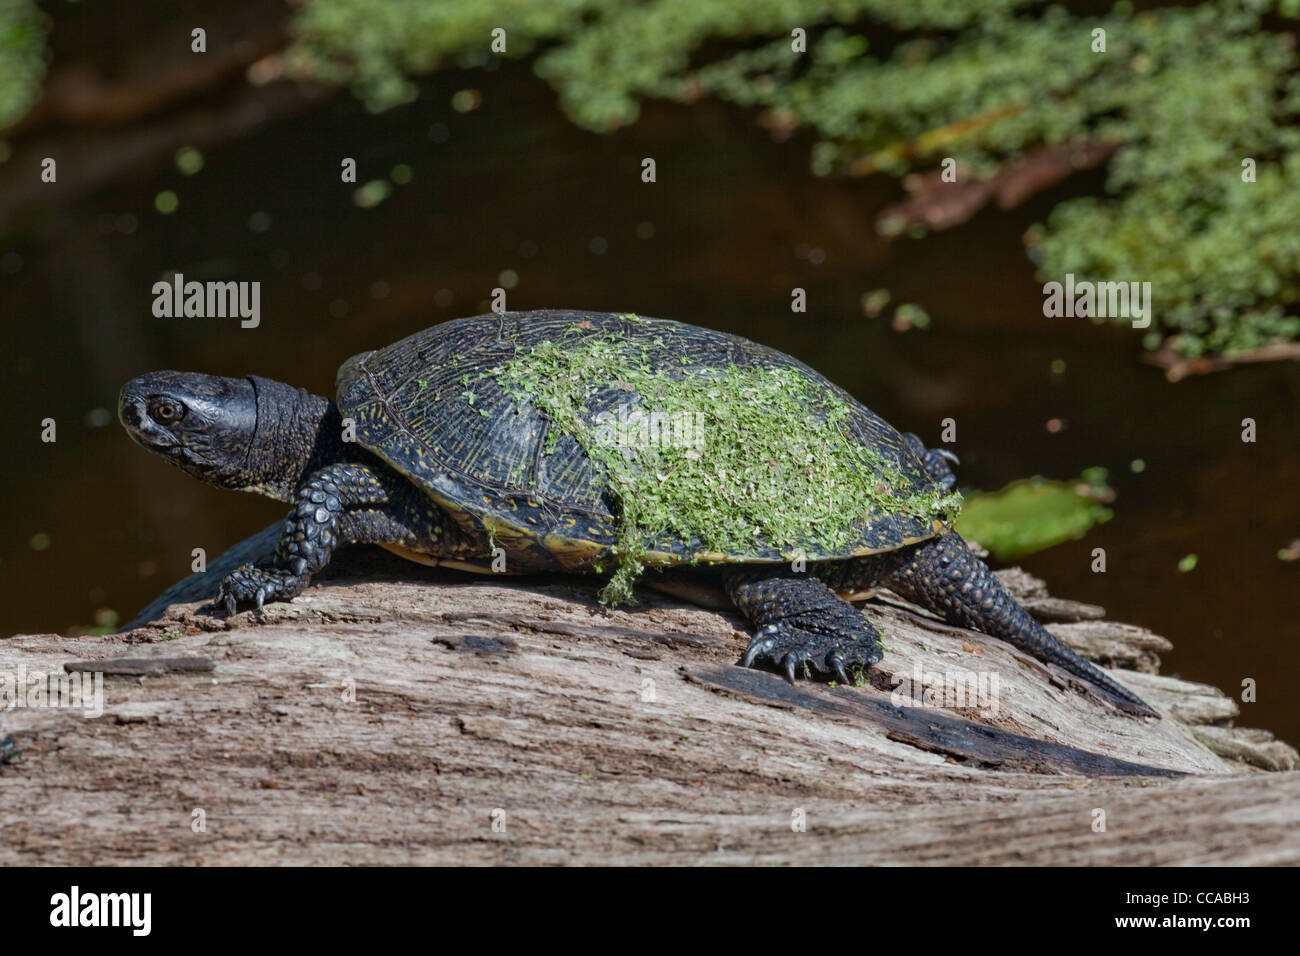 European Pond Terrapin (Emys orbicularis). With Duckweed (Lemna sp. on its shell or carapace. Stock Photo